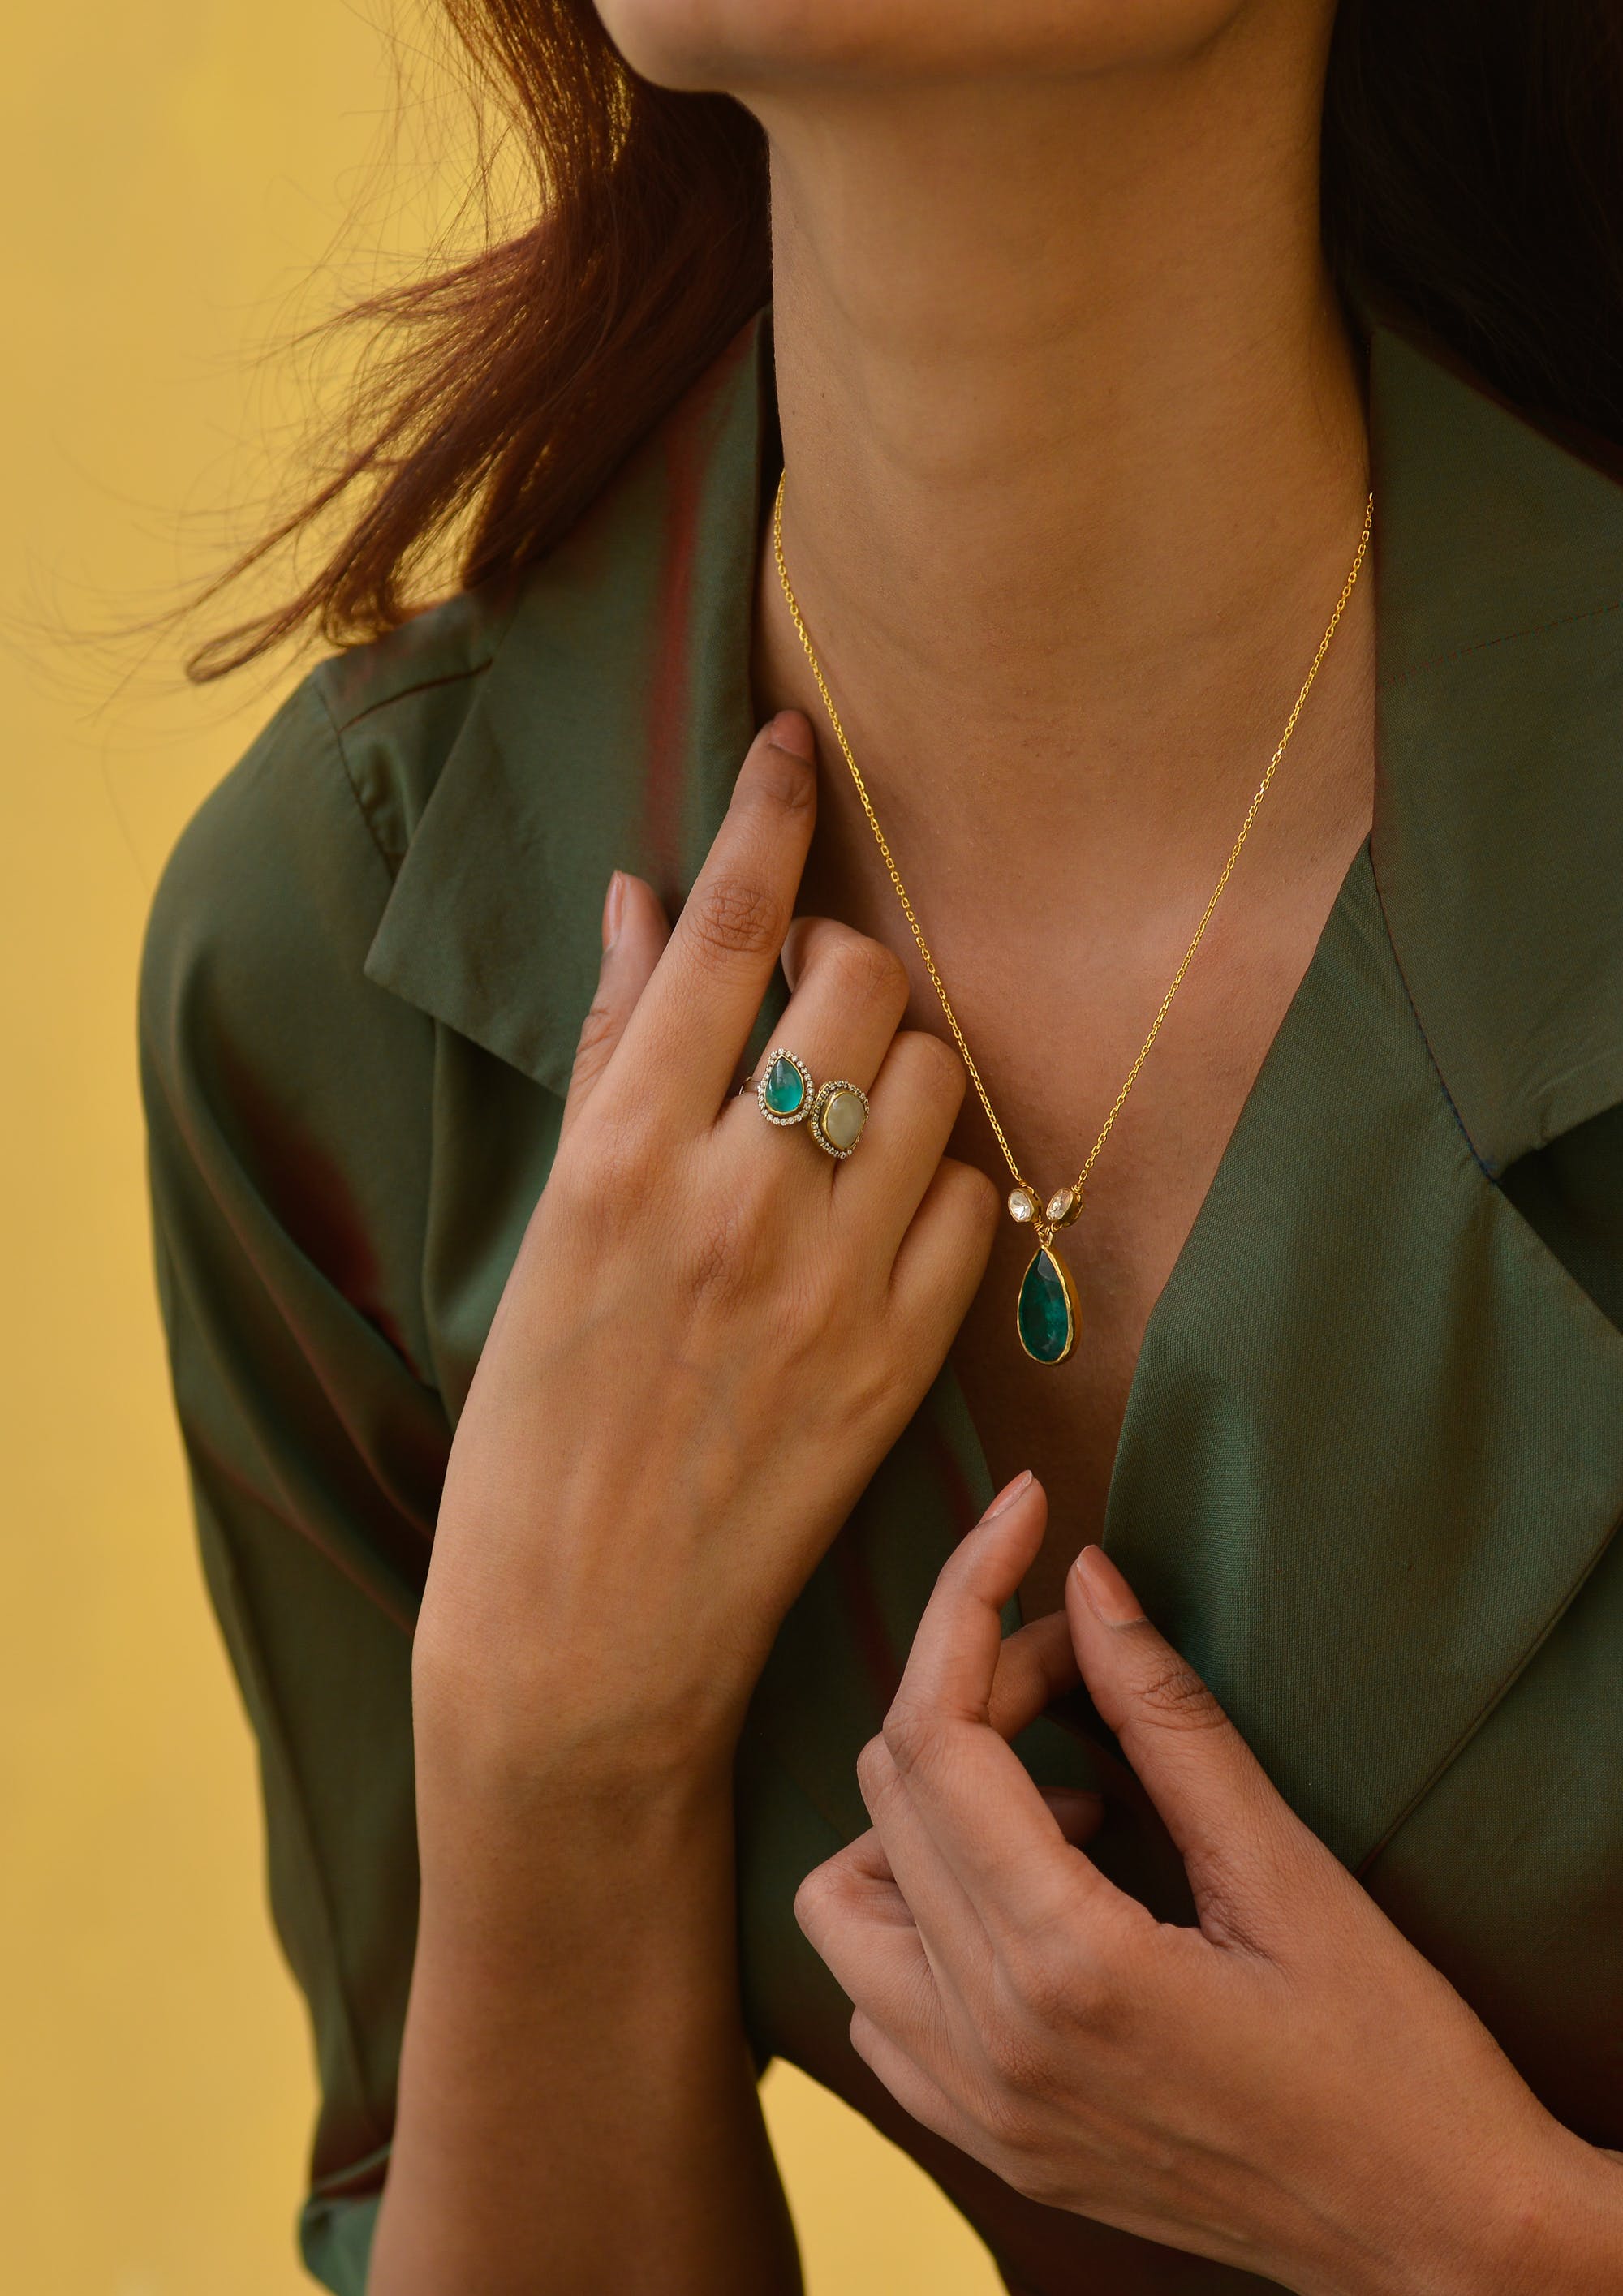 A woman wearing emerald pendant and ring | Source: Pexels